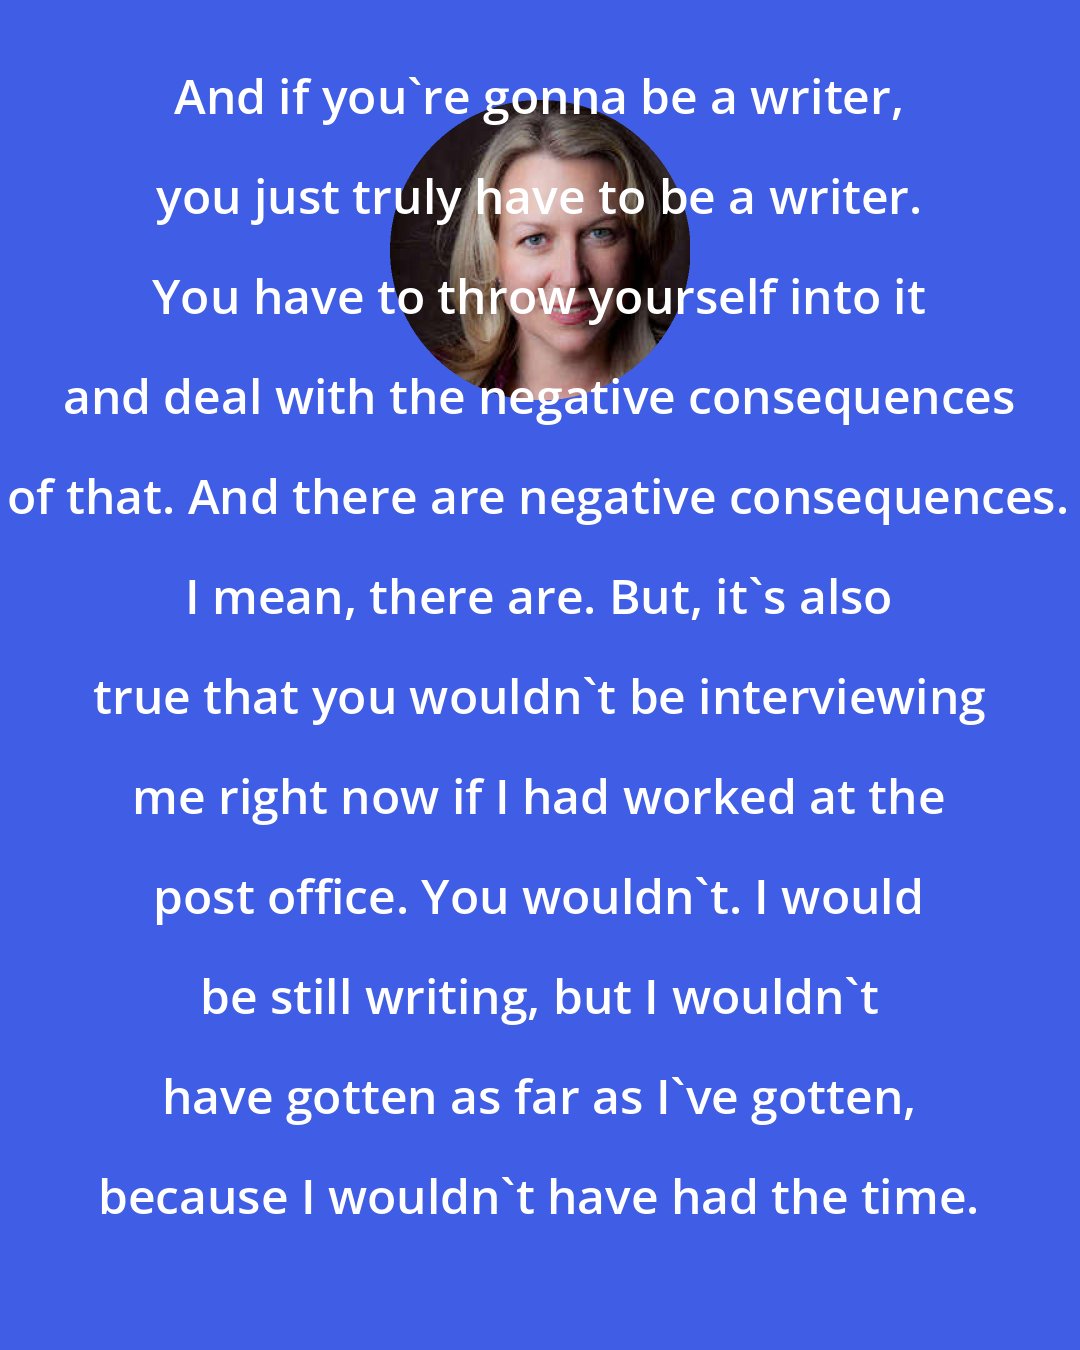 Cheryl Strayed: And if you're gonna be a writer, you just truly have to be a writer. You have to throw yourself into it and deal with the negative consequences of that. And there are negative consequences. I mean, there are. But, it's also true that you wouldn't be interviewing me right now if I had worked at the post office. You wouldn't. I would be still writing, but I wouldn't have gotten as far as I've gotten, because I wouldn't have had the time.